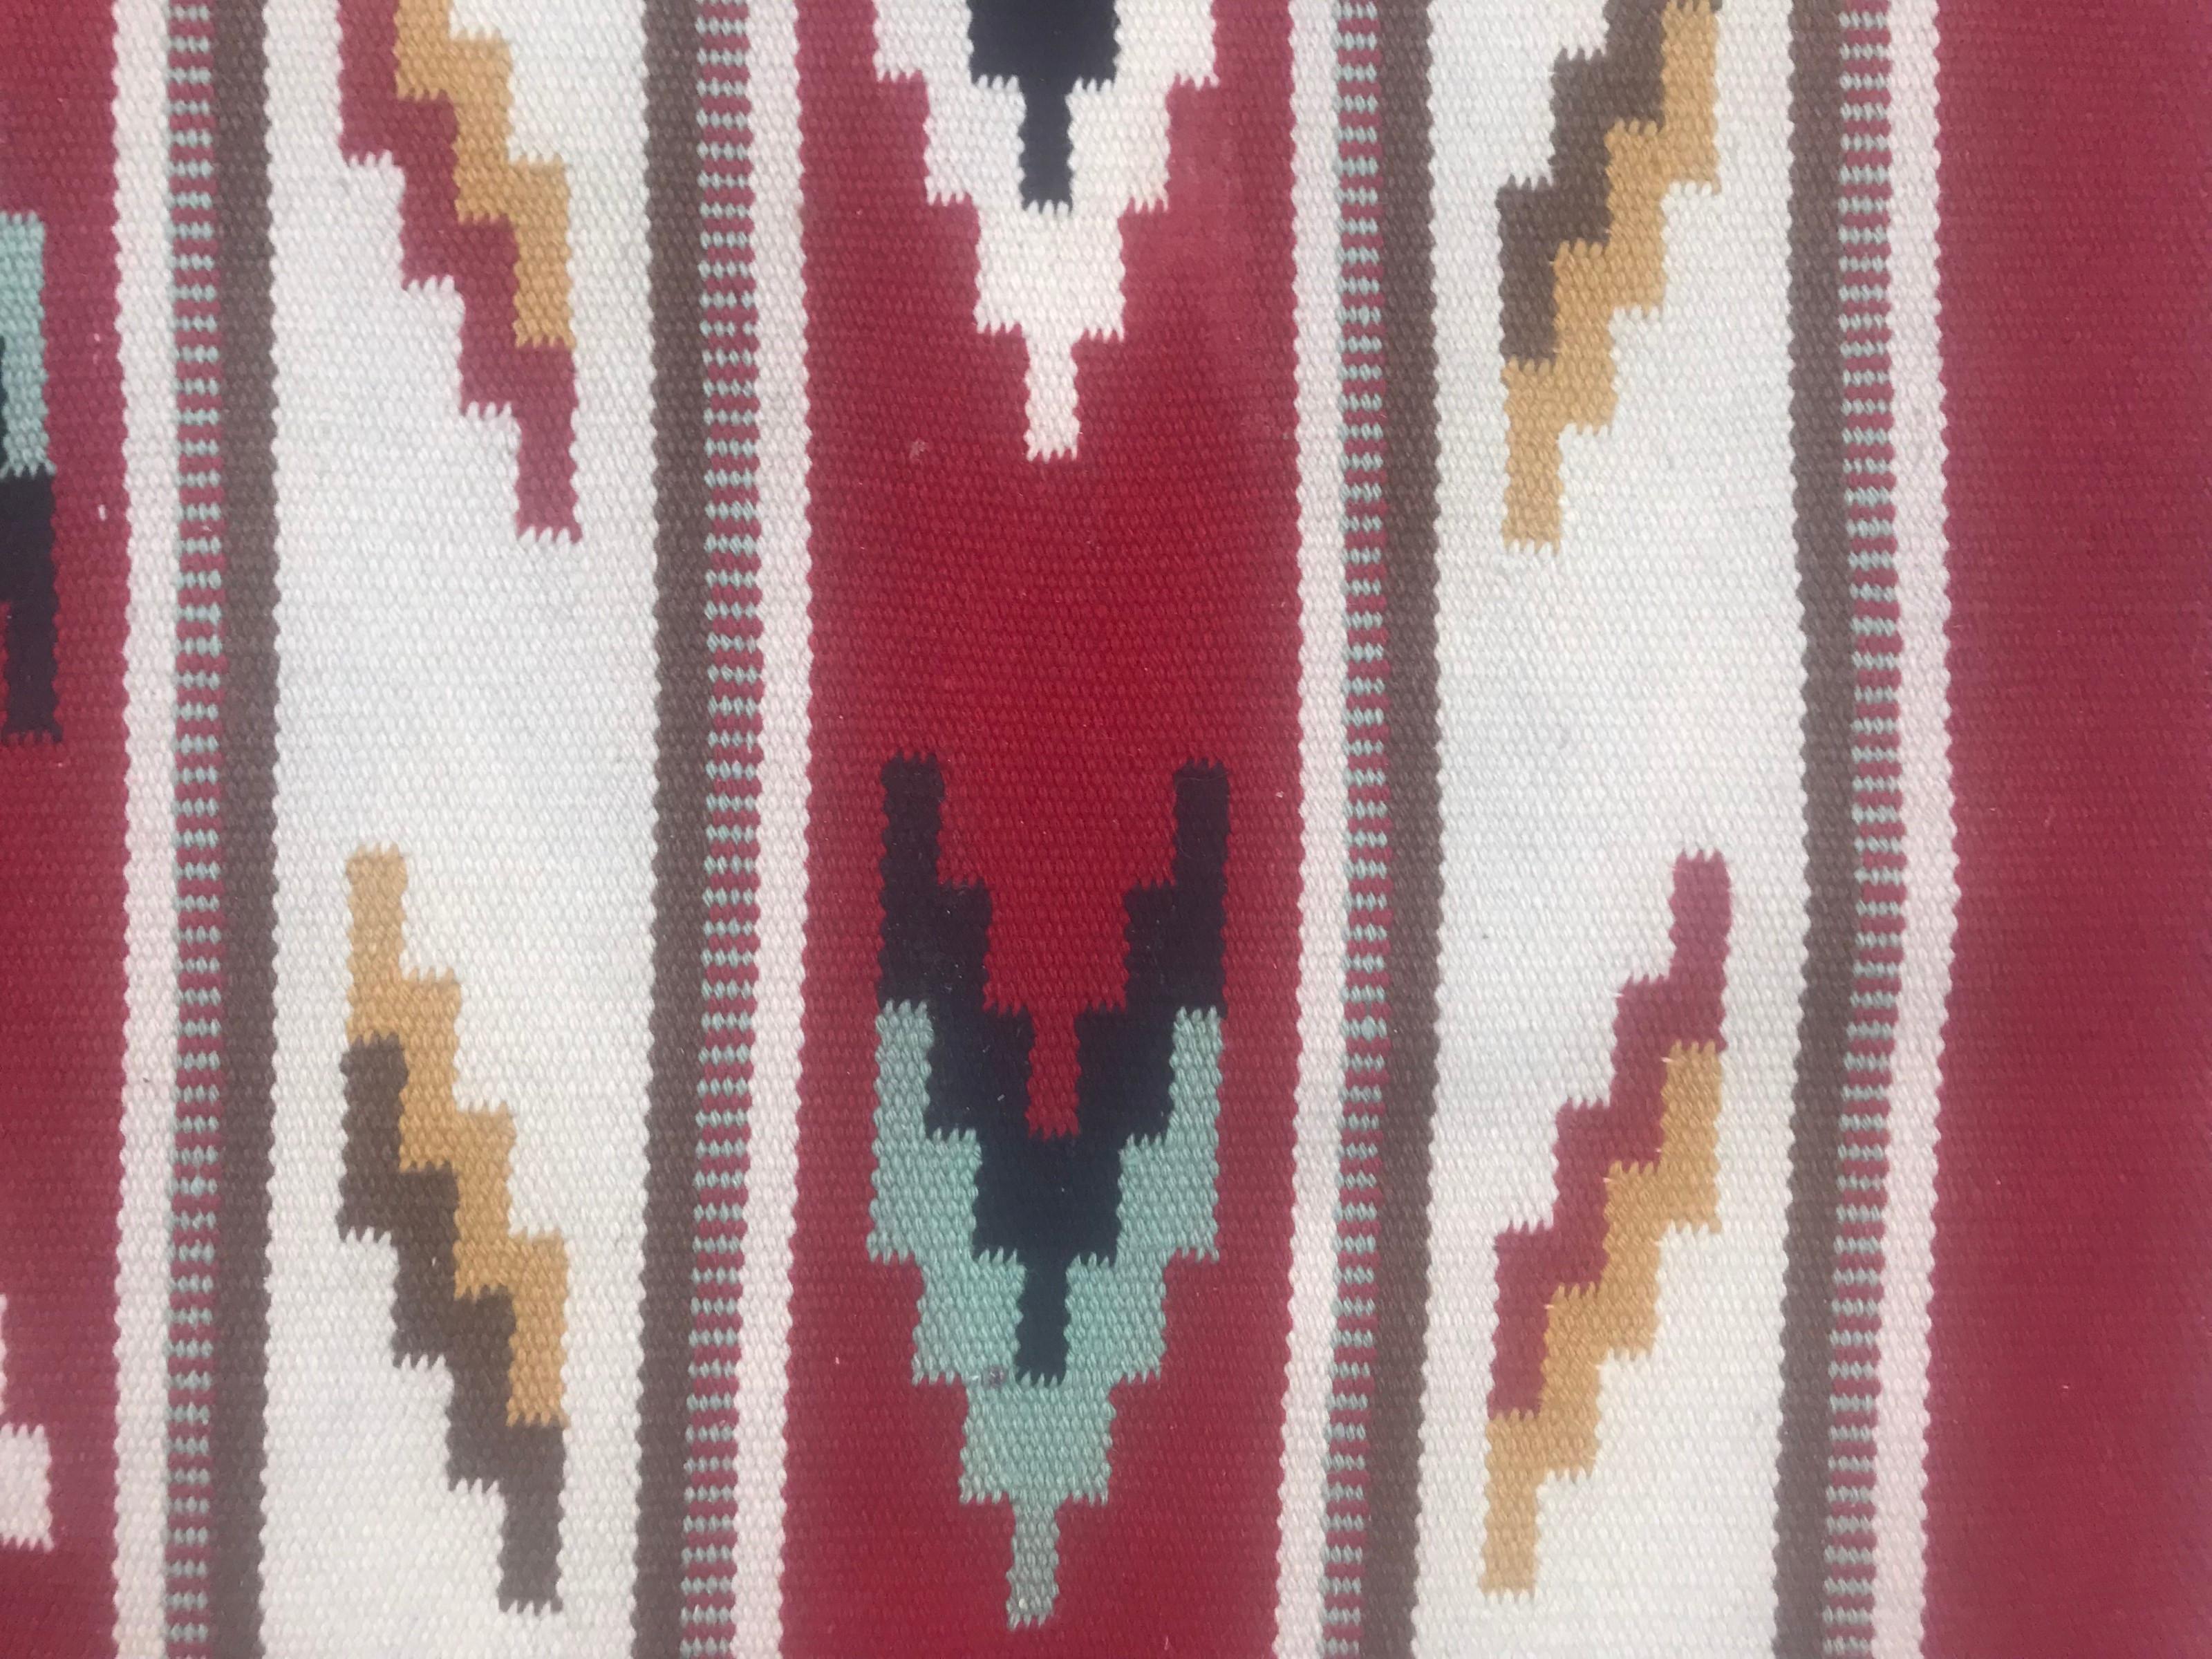 Beautiful 20th century flat-woven Scandinavian rug with beautiful geometrical design and beautiful colors with red, blue, orange, grey and black, entirely handwoven with wool on cotton foundation.